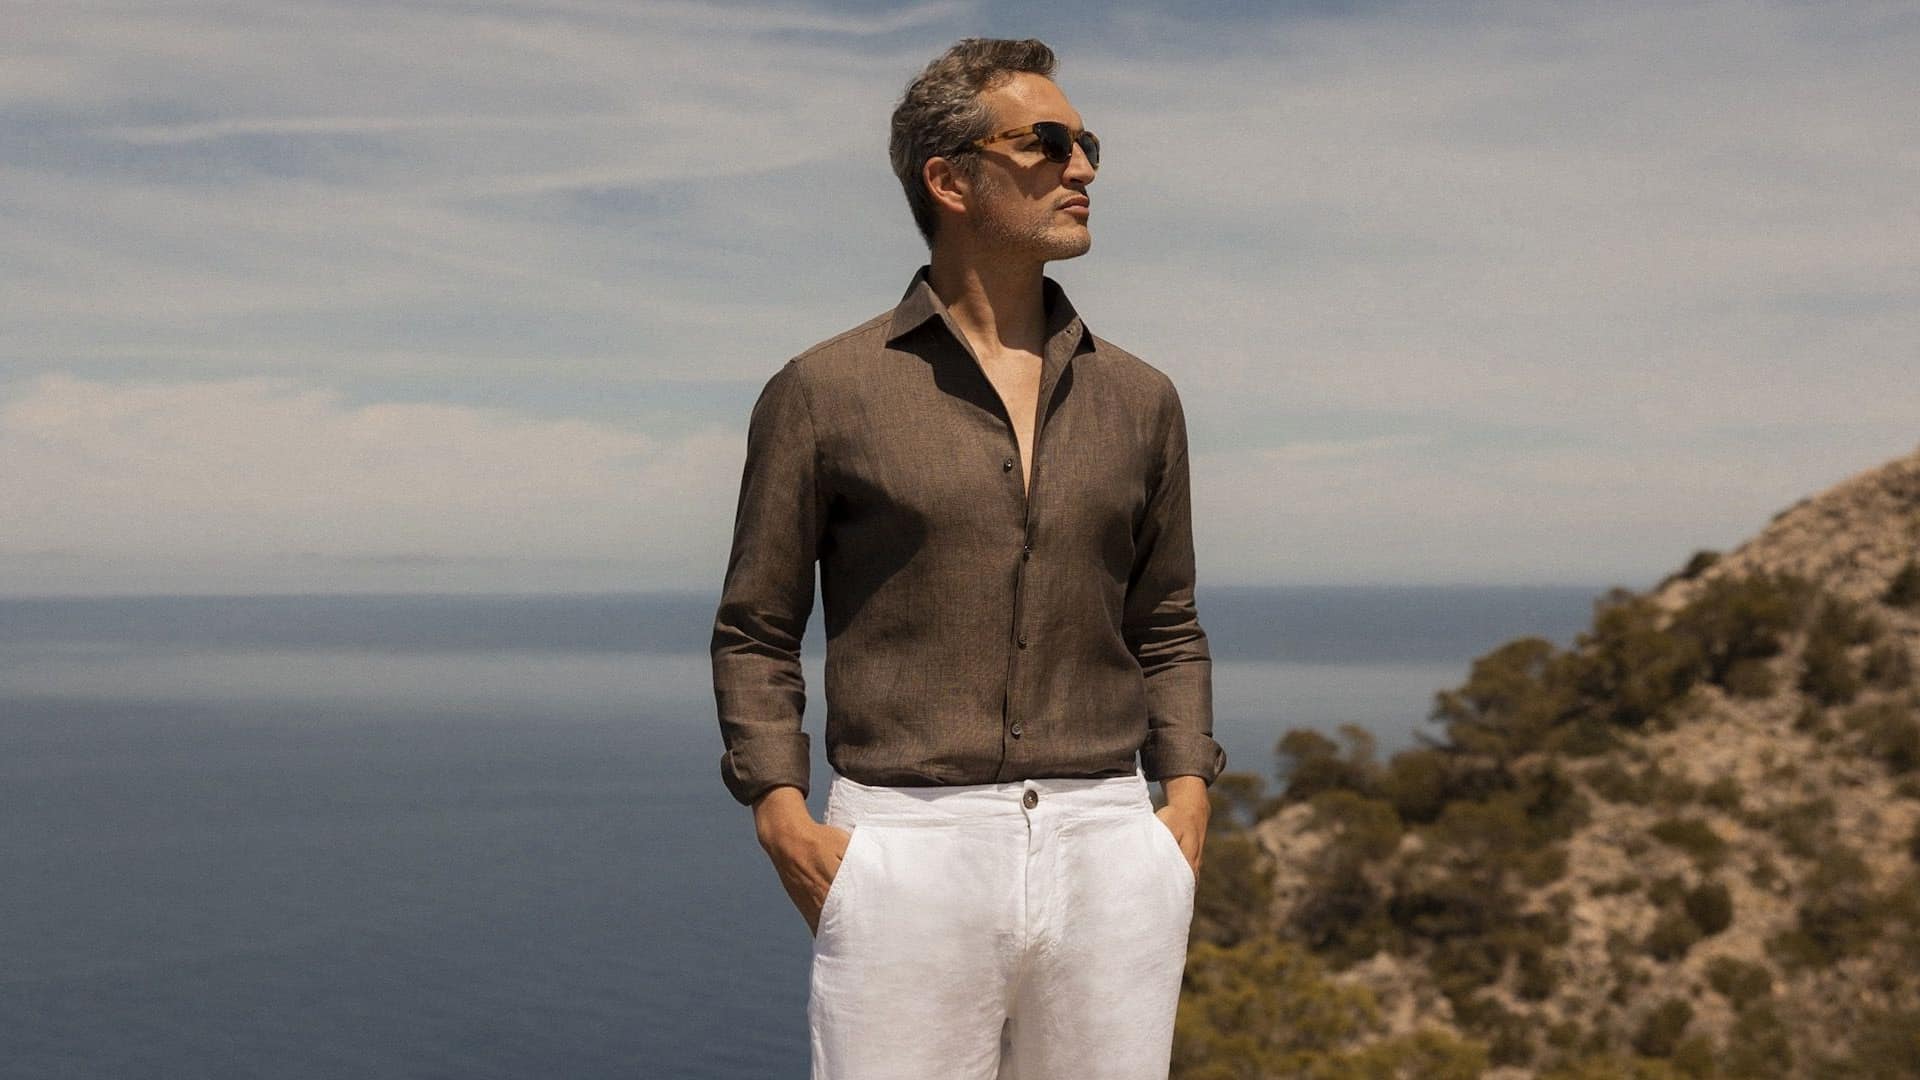 The best men's summer fashion guide you'll ever read